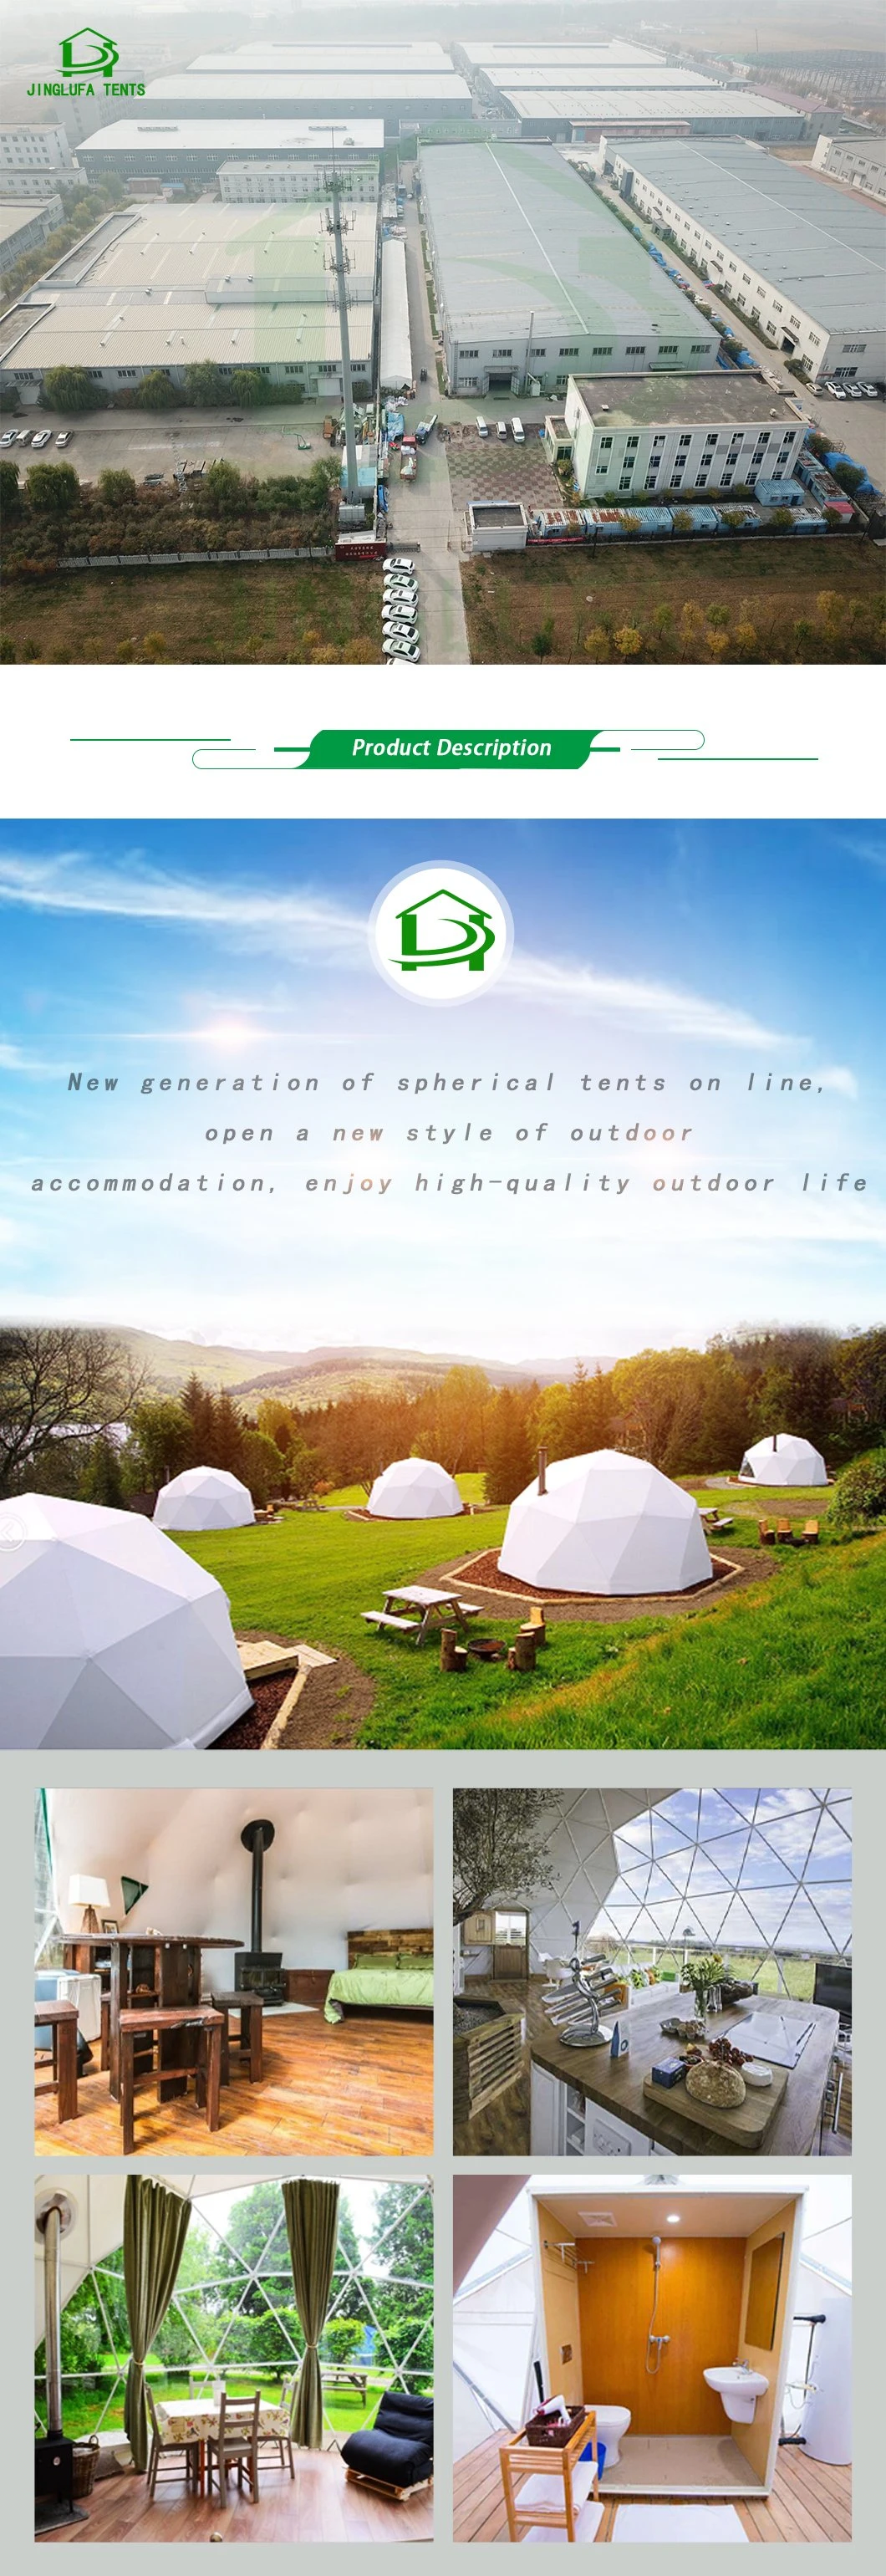 6m Large Outdoor Canvas Geodesic Dome Tent with Glass Door